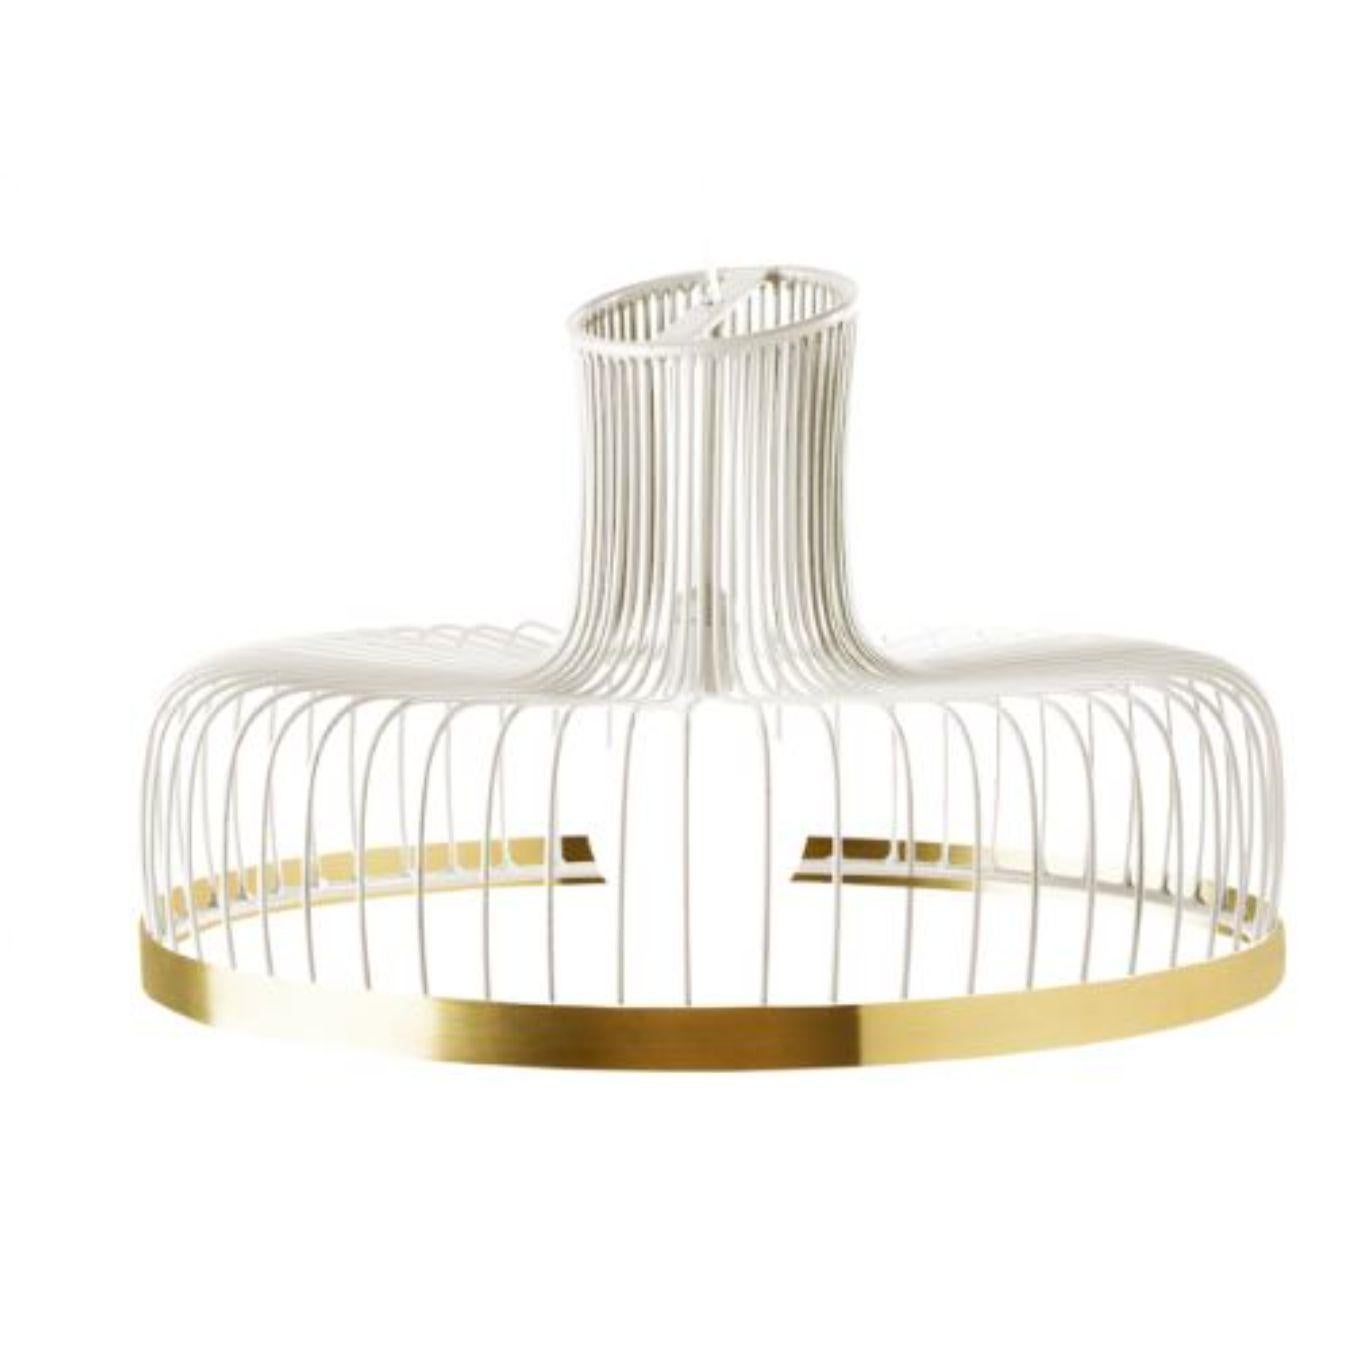 Ivory New Spider Suspension lamp with brass ring by Dooq
Dimensions: W 70 x D 70 x H 35 cm
Materials: lacquered metal, polished or brushed metal, brass.
Also available in different colors and materials. 

Information:
230V/50Hz
E27/1x20W